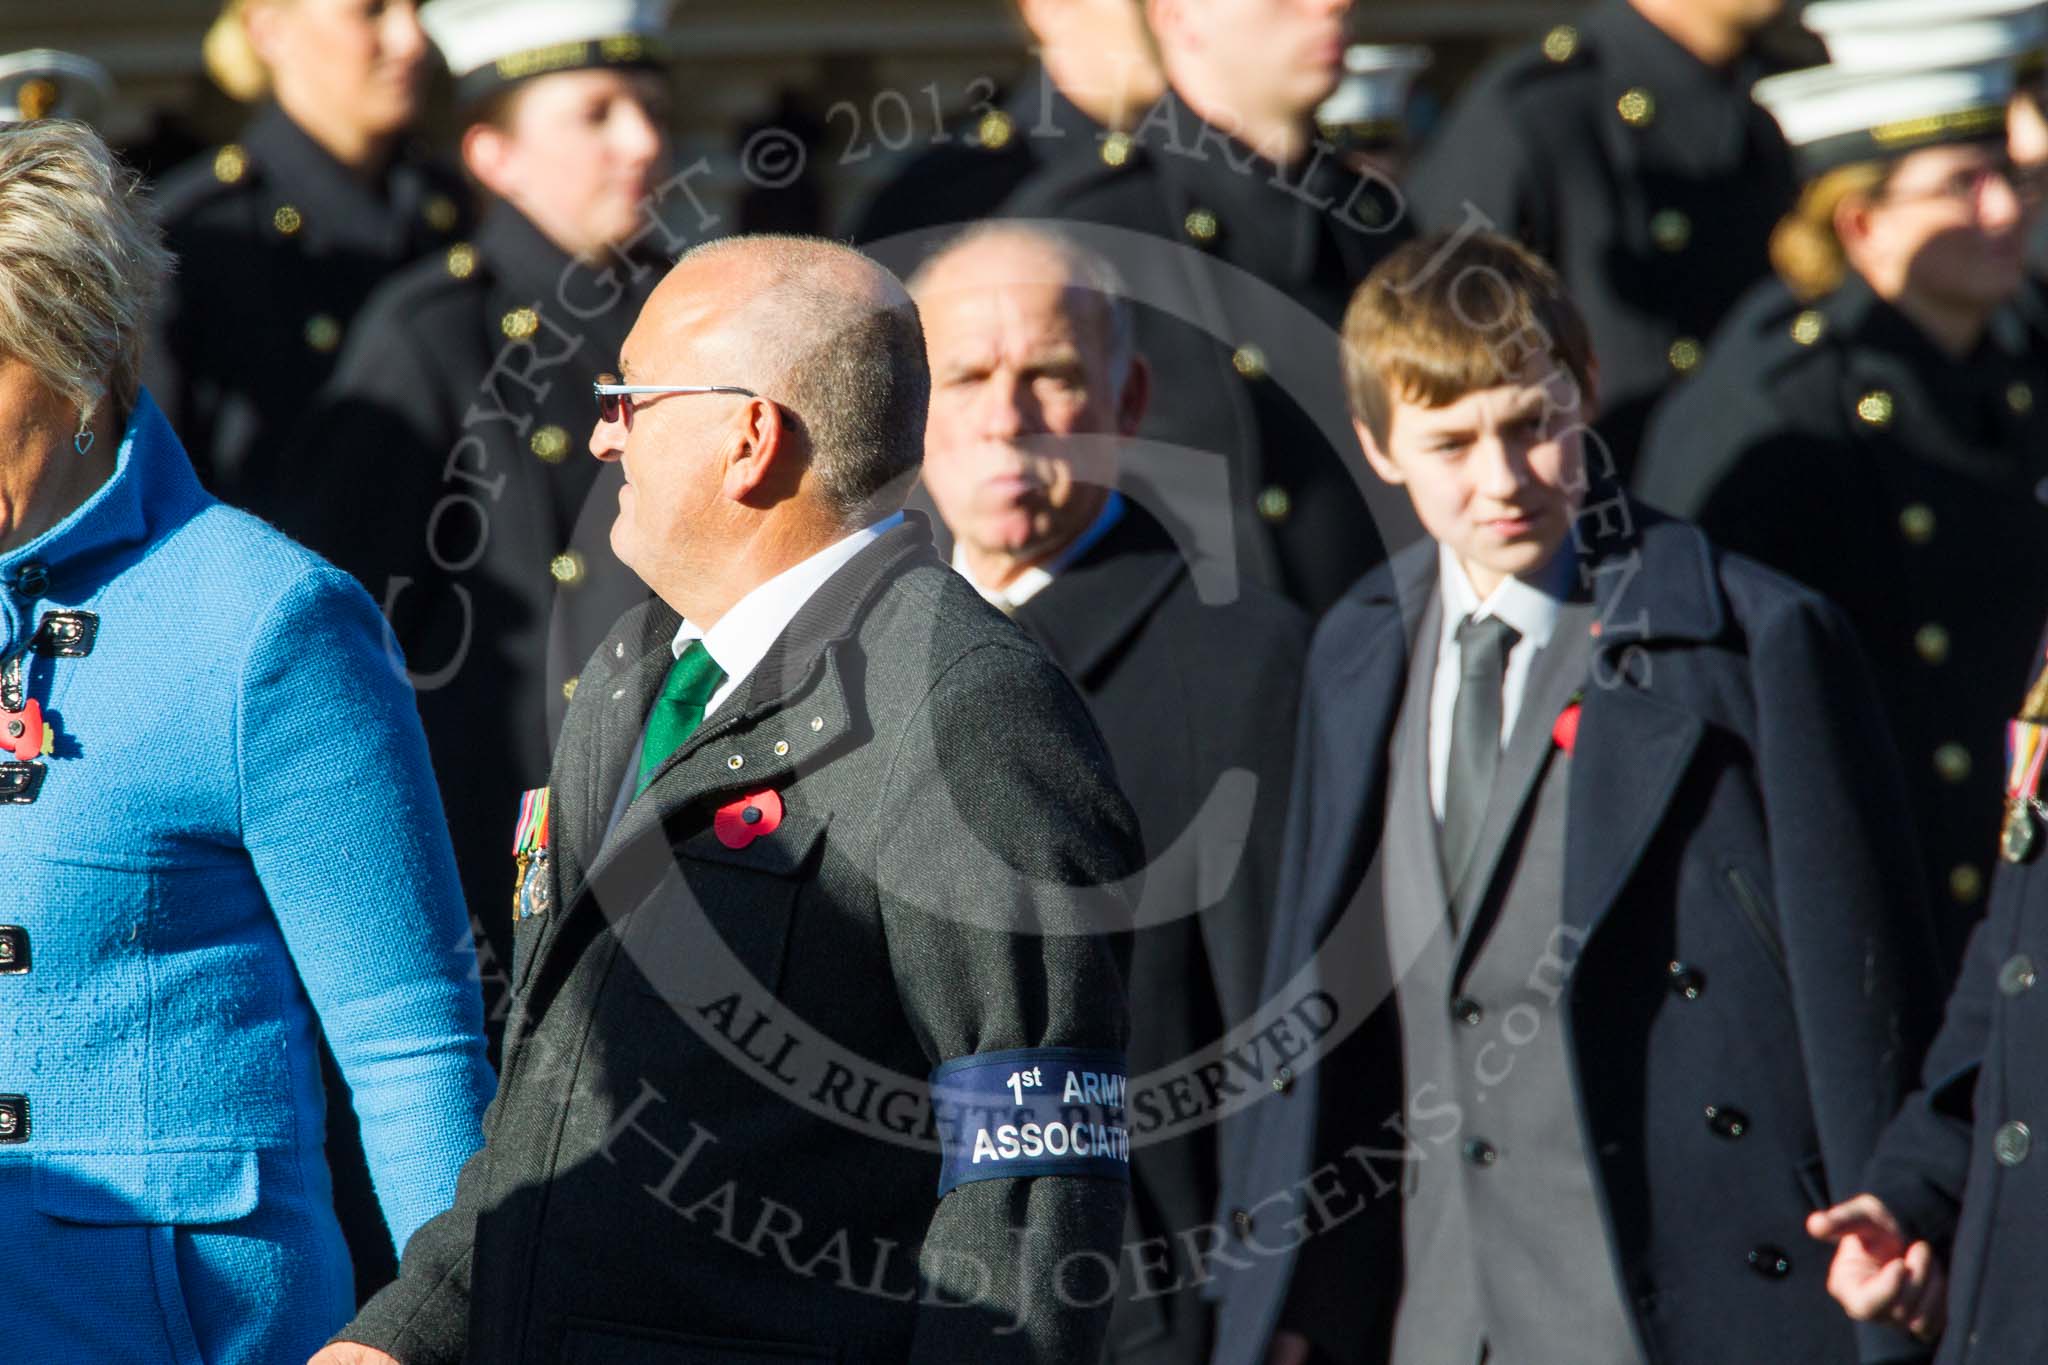 Remembrance Sunday at the Cenotaph in London 2014: Group F19 - 1st Army Association.
Press stand opposite the Foreign Office building, Whitehall, London SW1,
London,
Greater London,
United Kingdom,
on 09 November 2014 at 11:59, image #1098